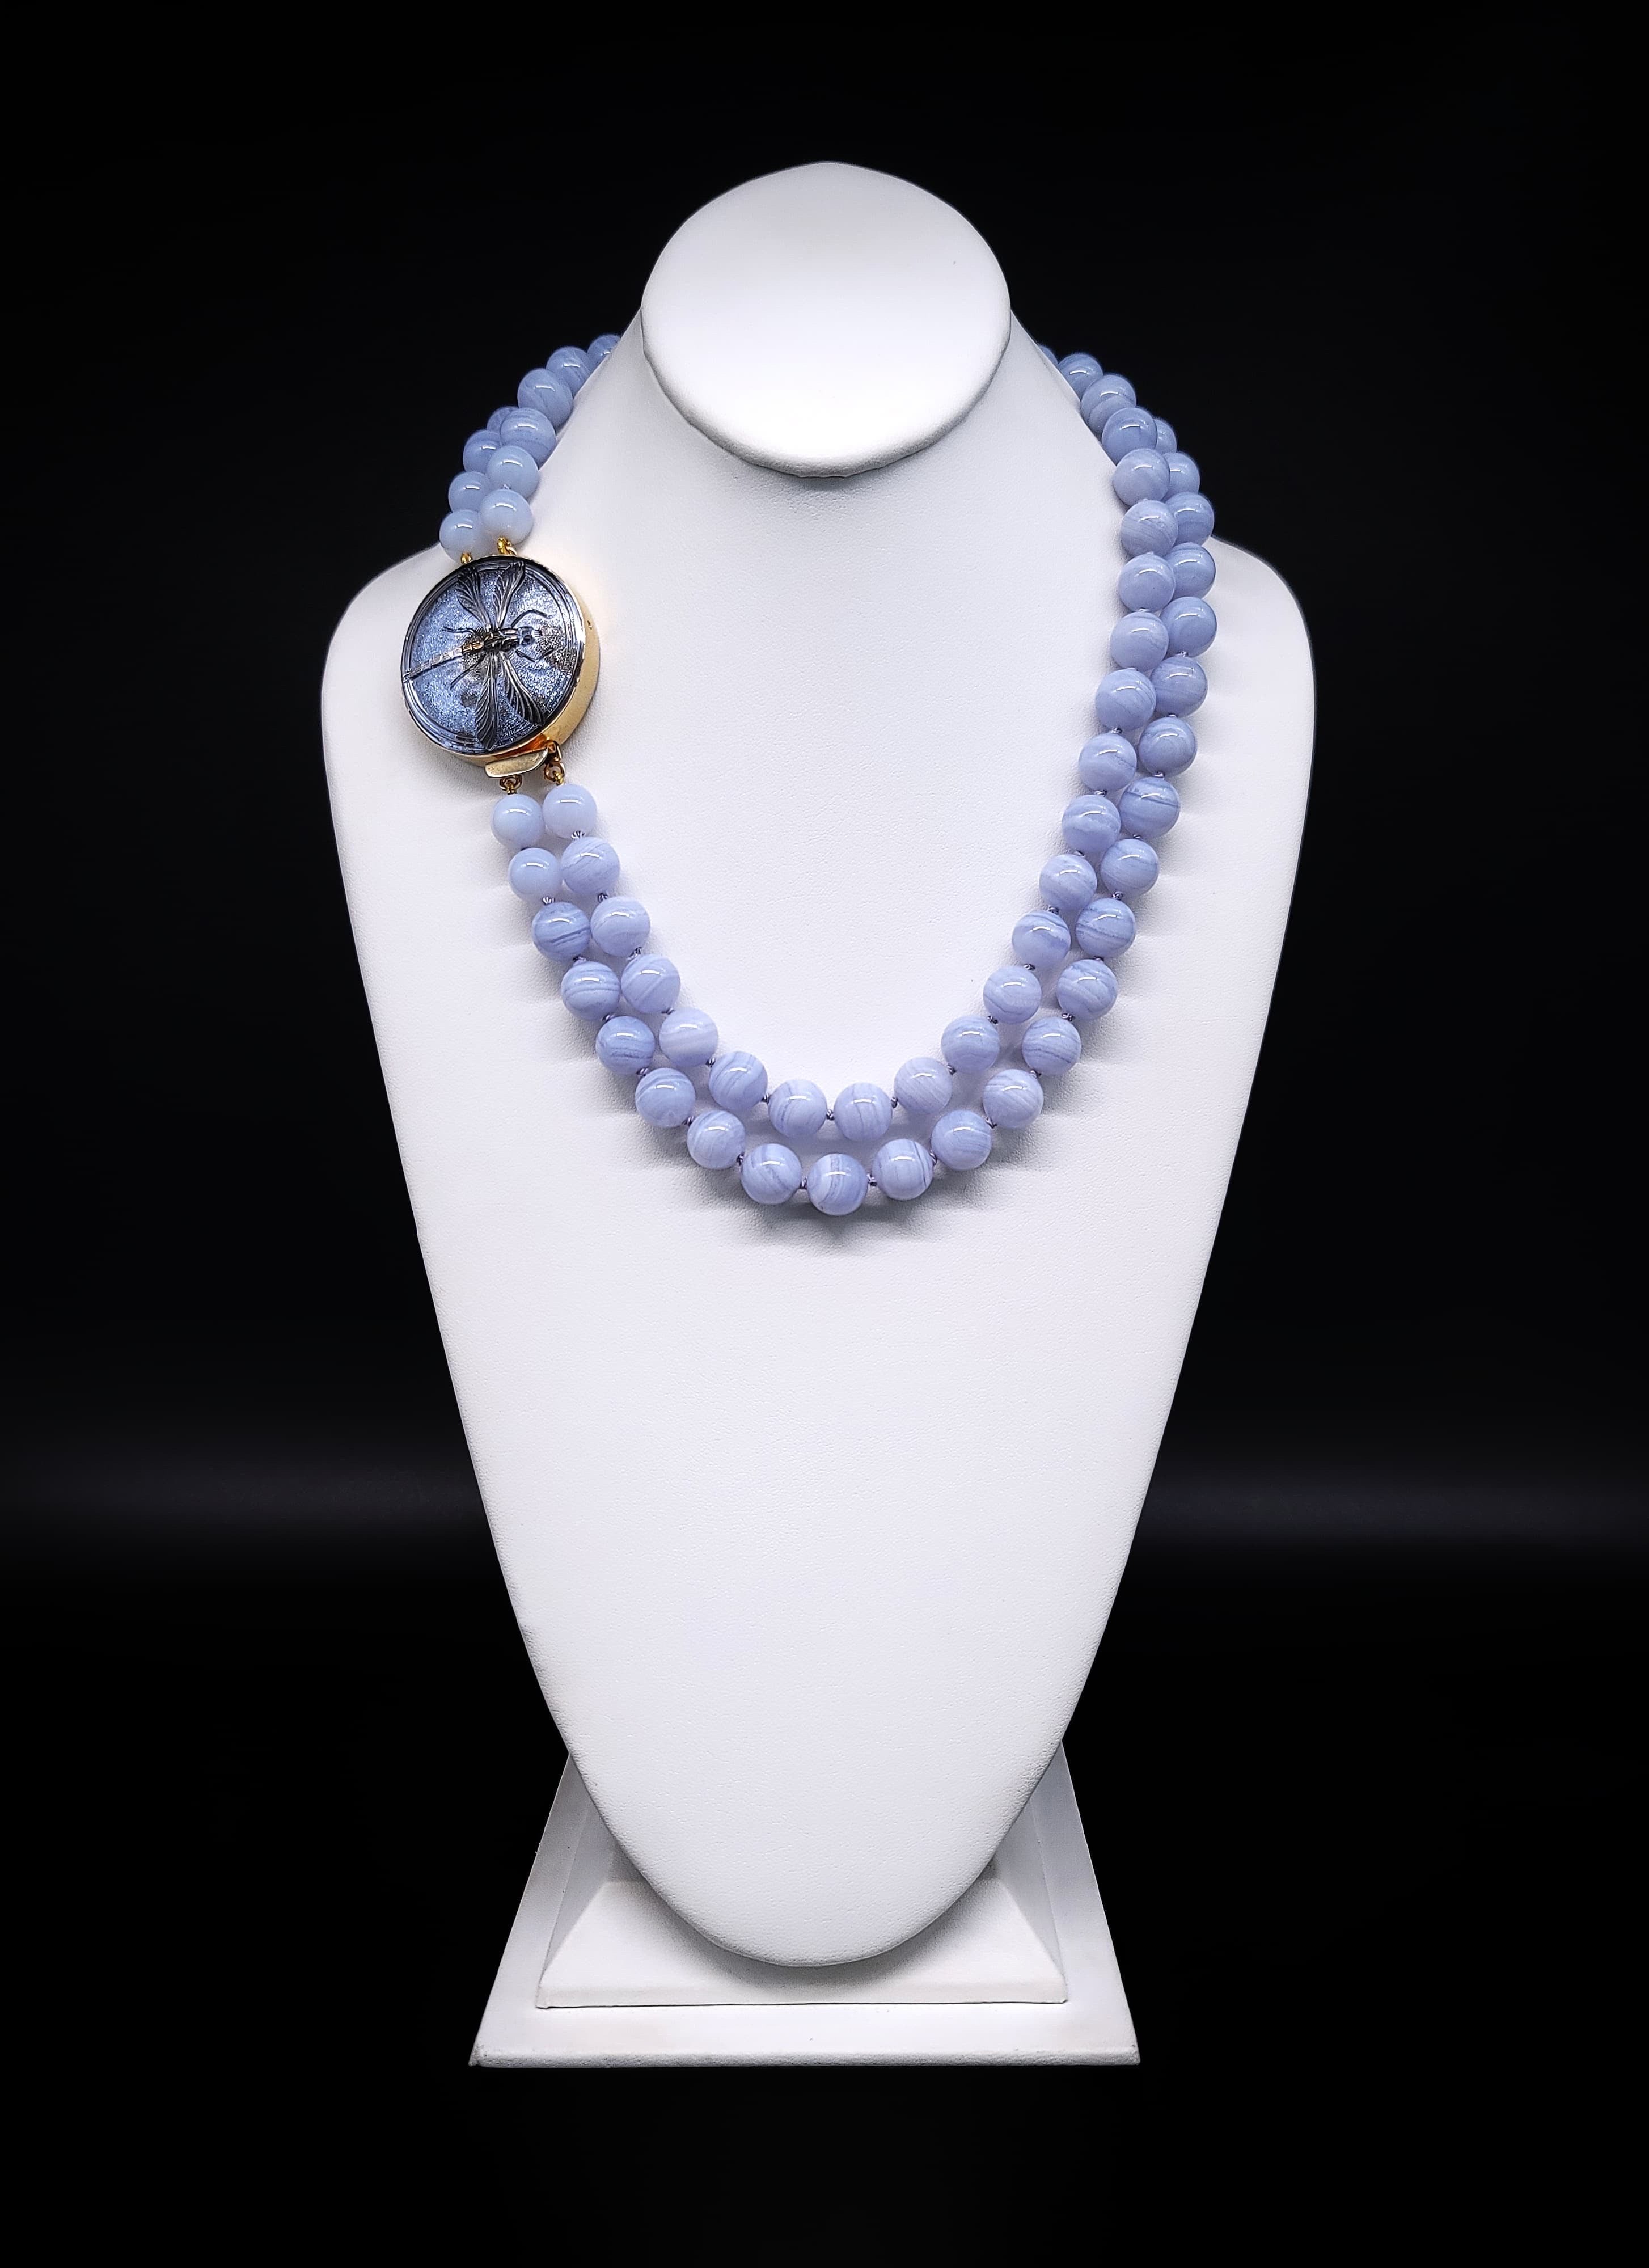 A.Jeschel Powerful Natural Blue Lace Agate necklace with a siganture clasp. For Sale